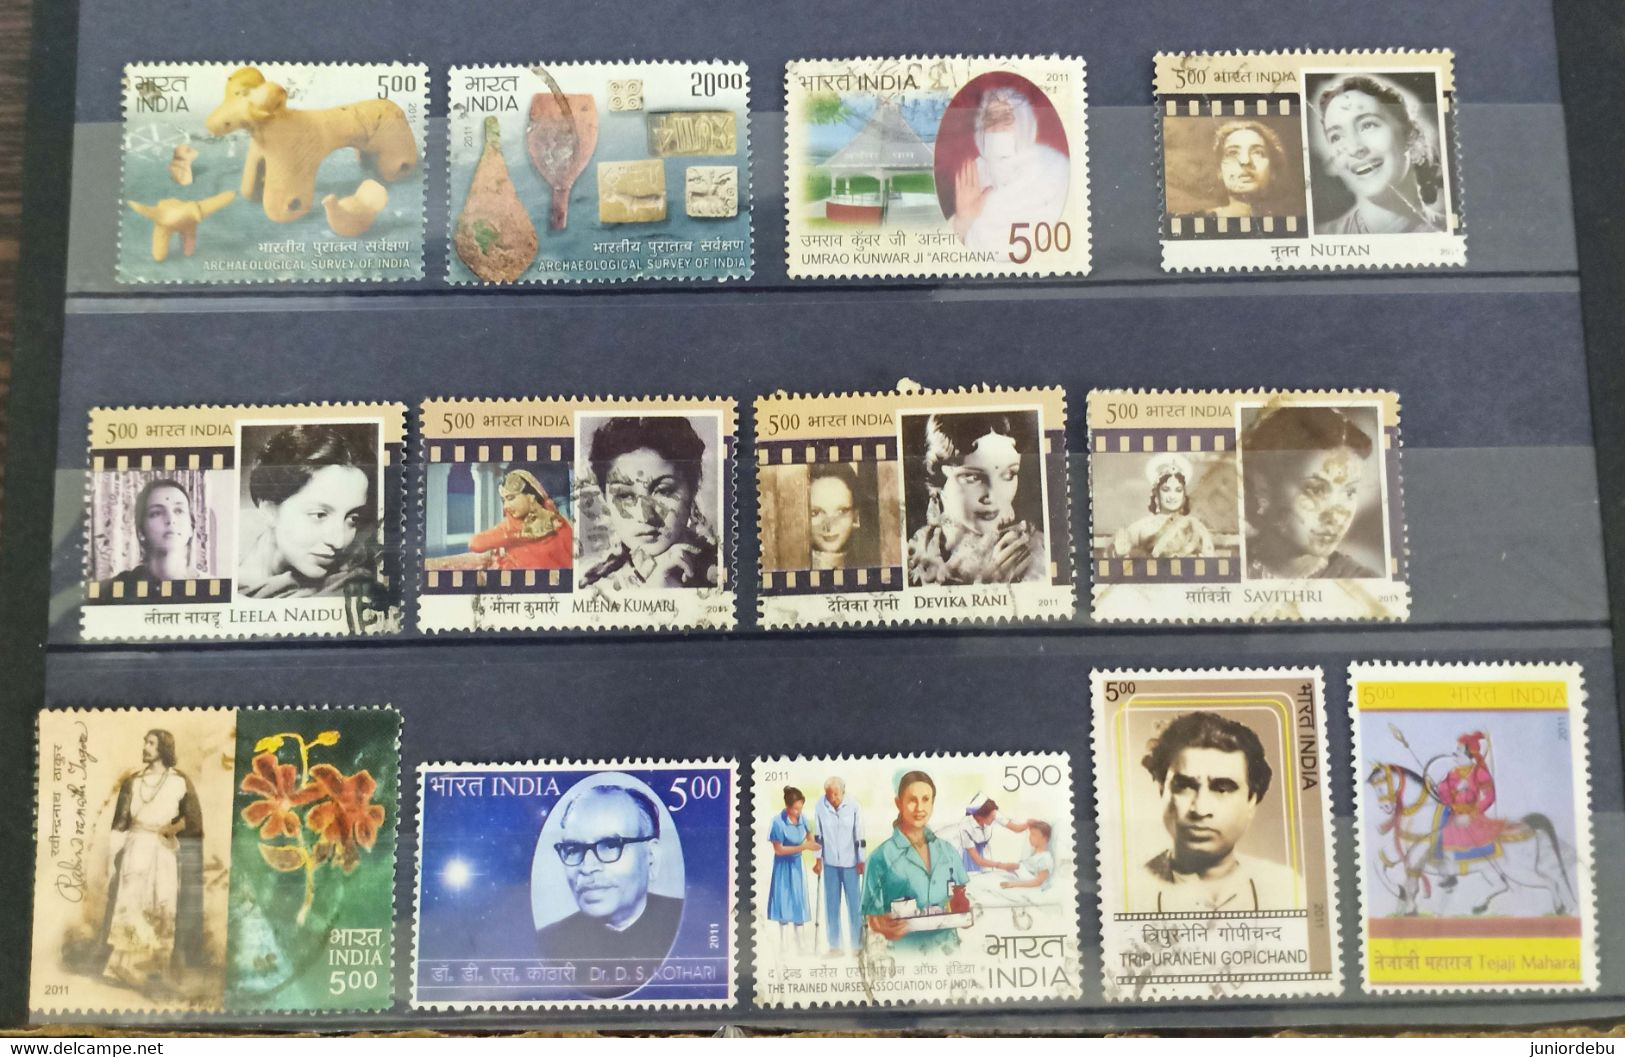 India  - 2011 - 13 Diff Commemorative Stamps   -  Nice  Selection - Used. ( CP 52 ) - Used Stamps